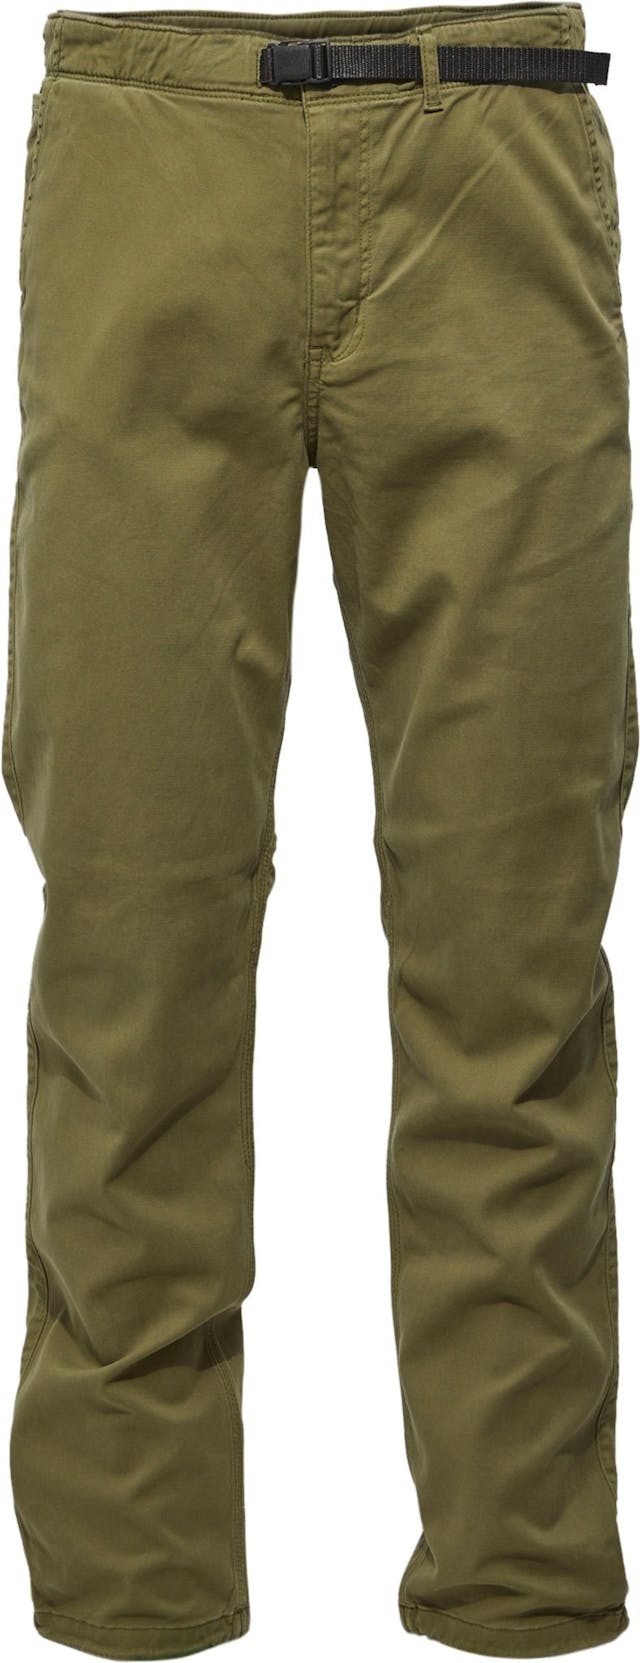 Product image for Live Free Everest Pant - Men's